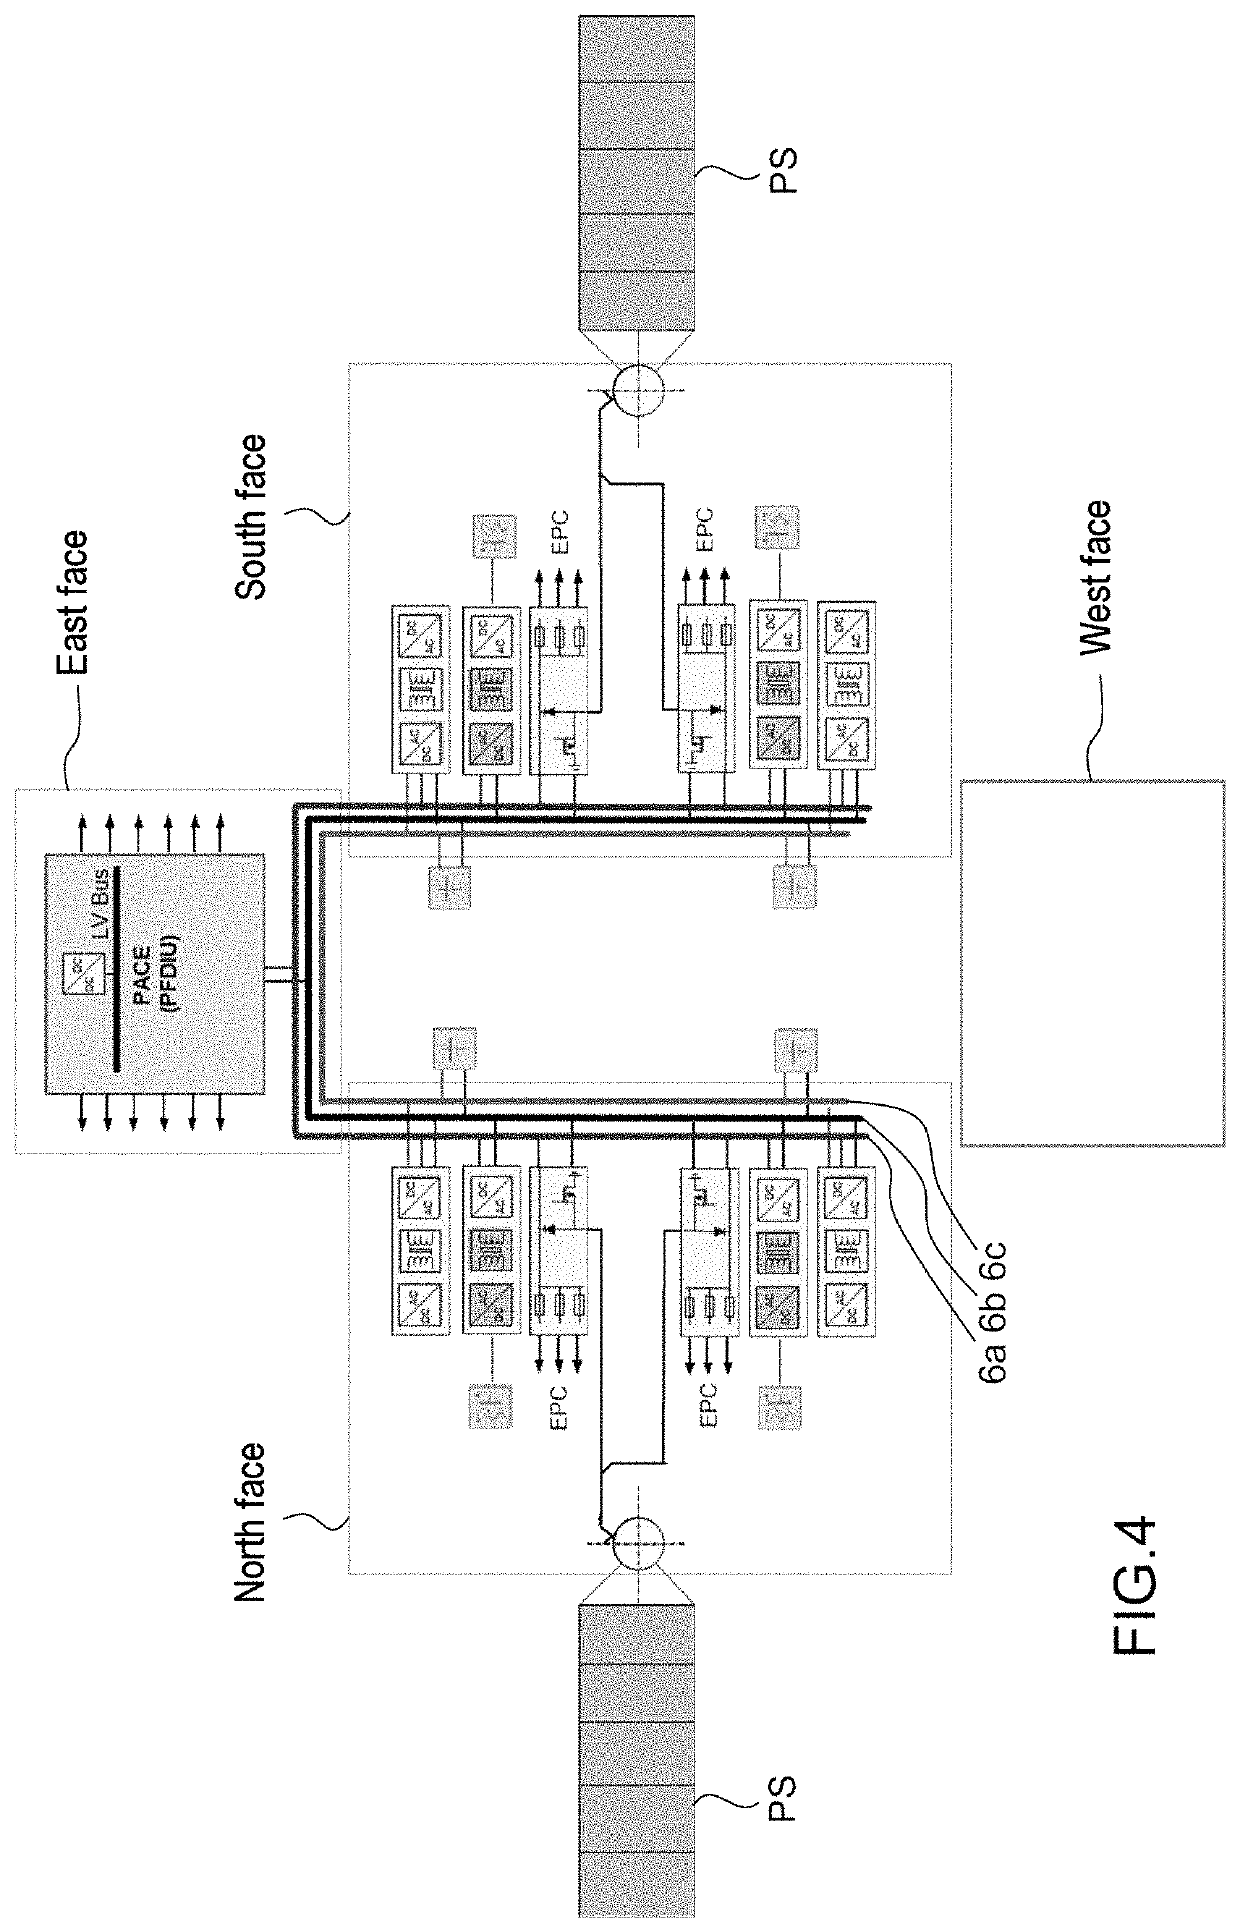 Electrical power distribution integrated into a satellite structural panel